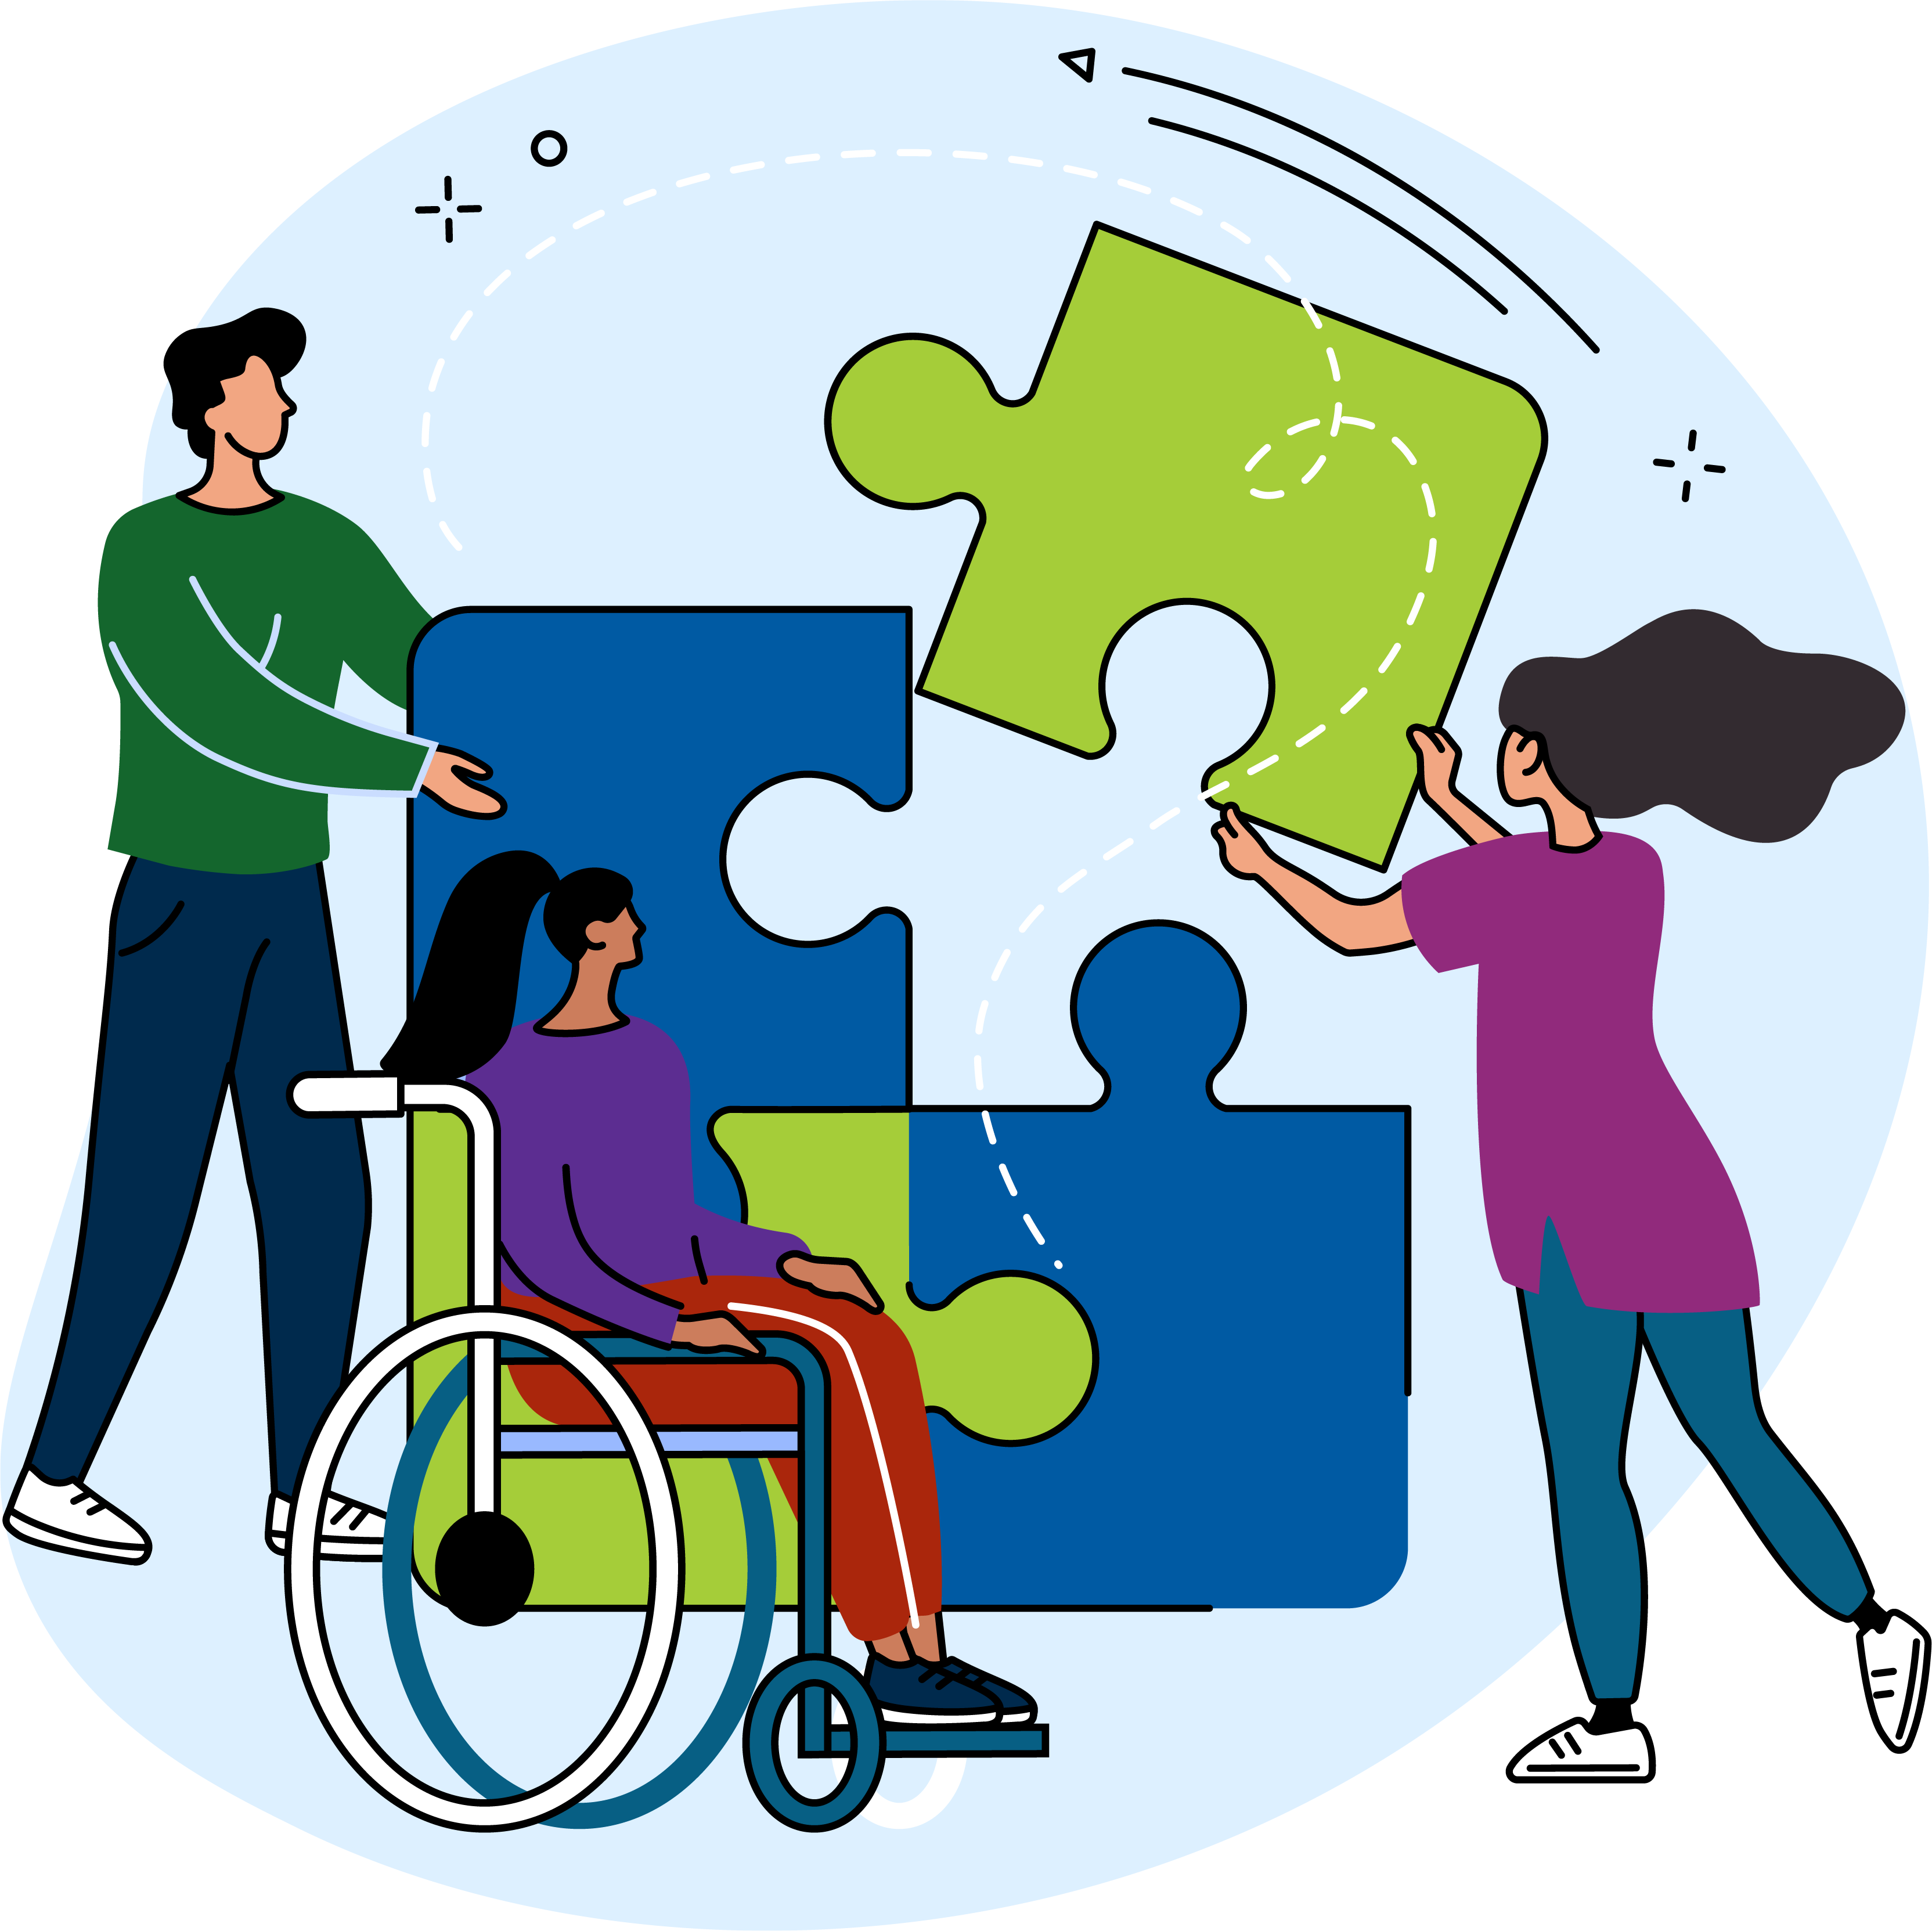 Illustration of three people, including a wheelchair user, assembling four large puzzle pieces together